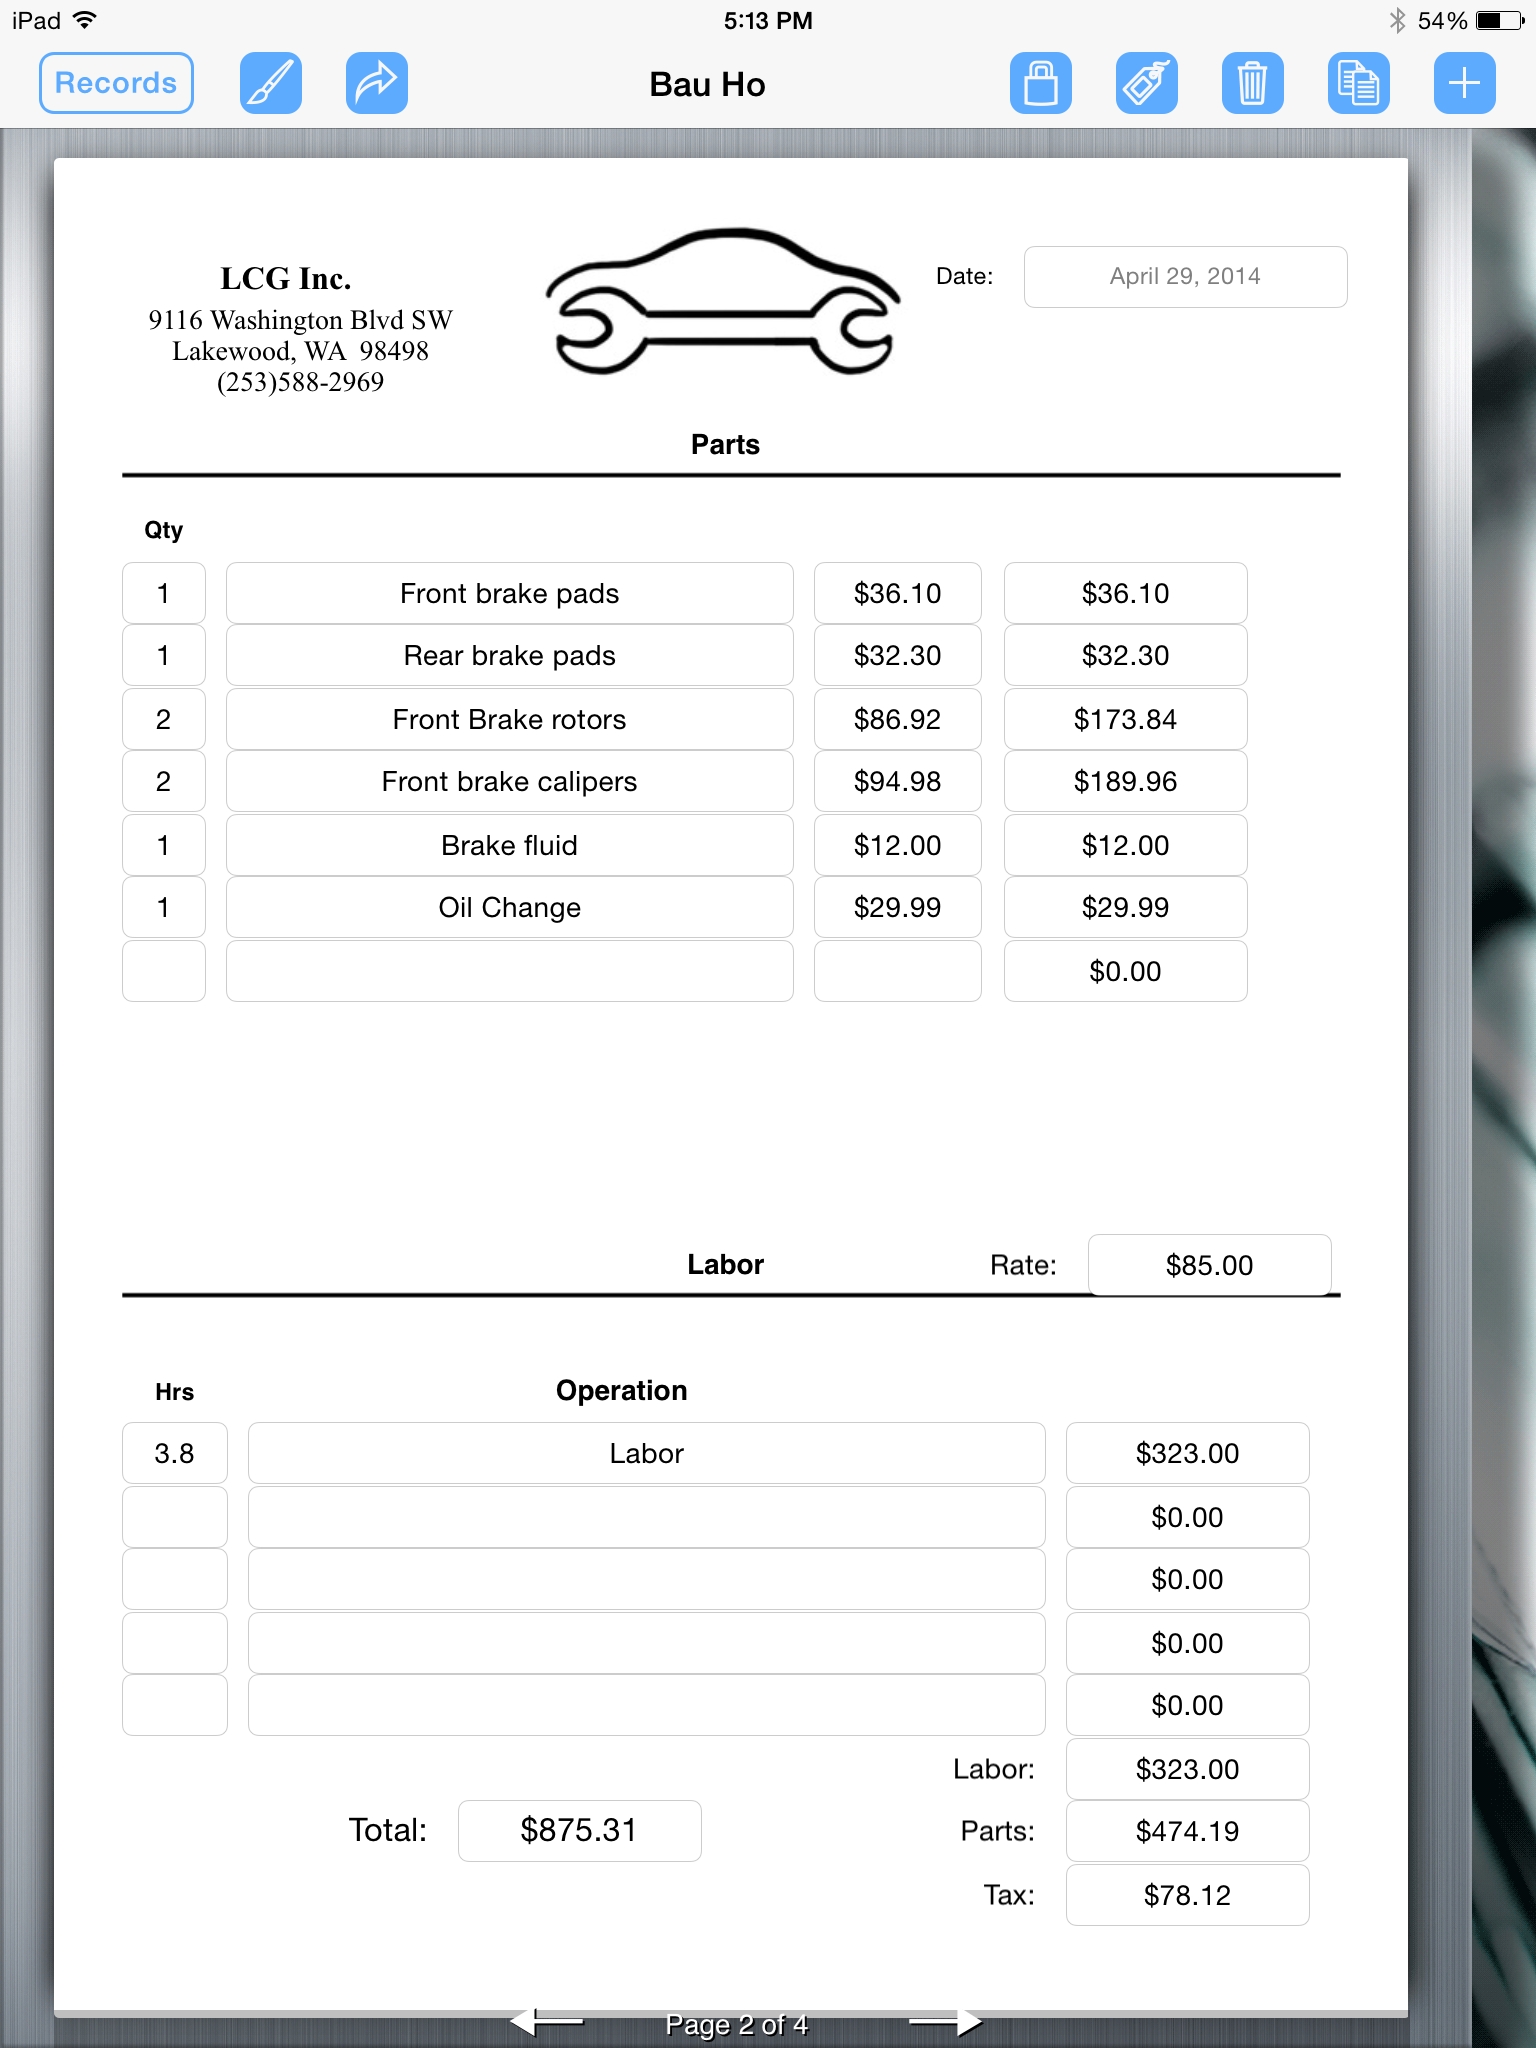 auto repair invoices auto repair service uses ipad for creating an invoice form 1536 X 2048